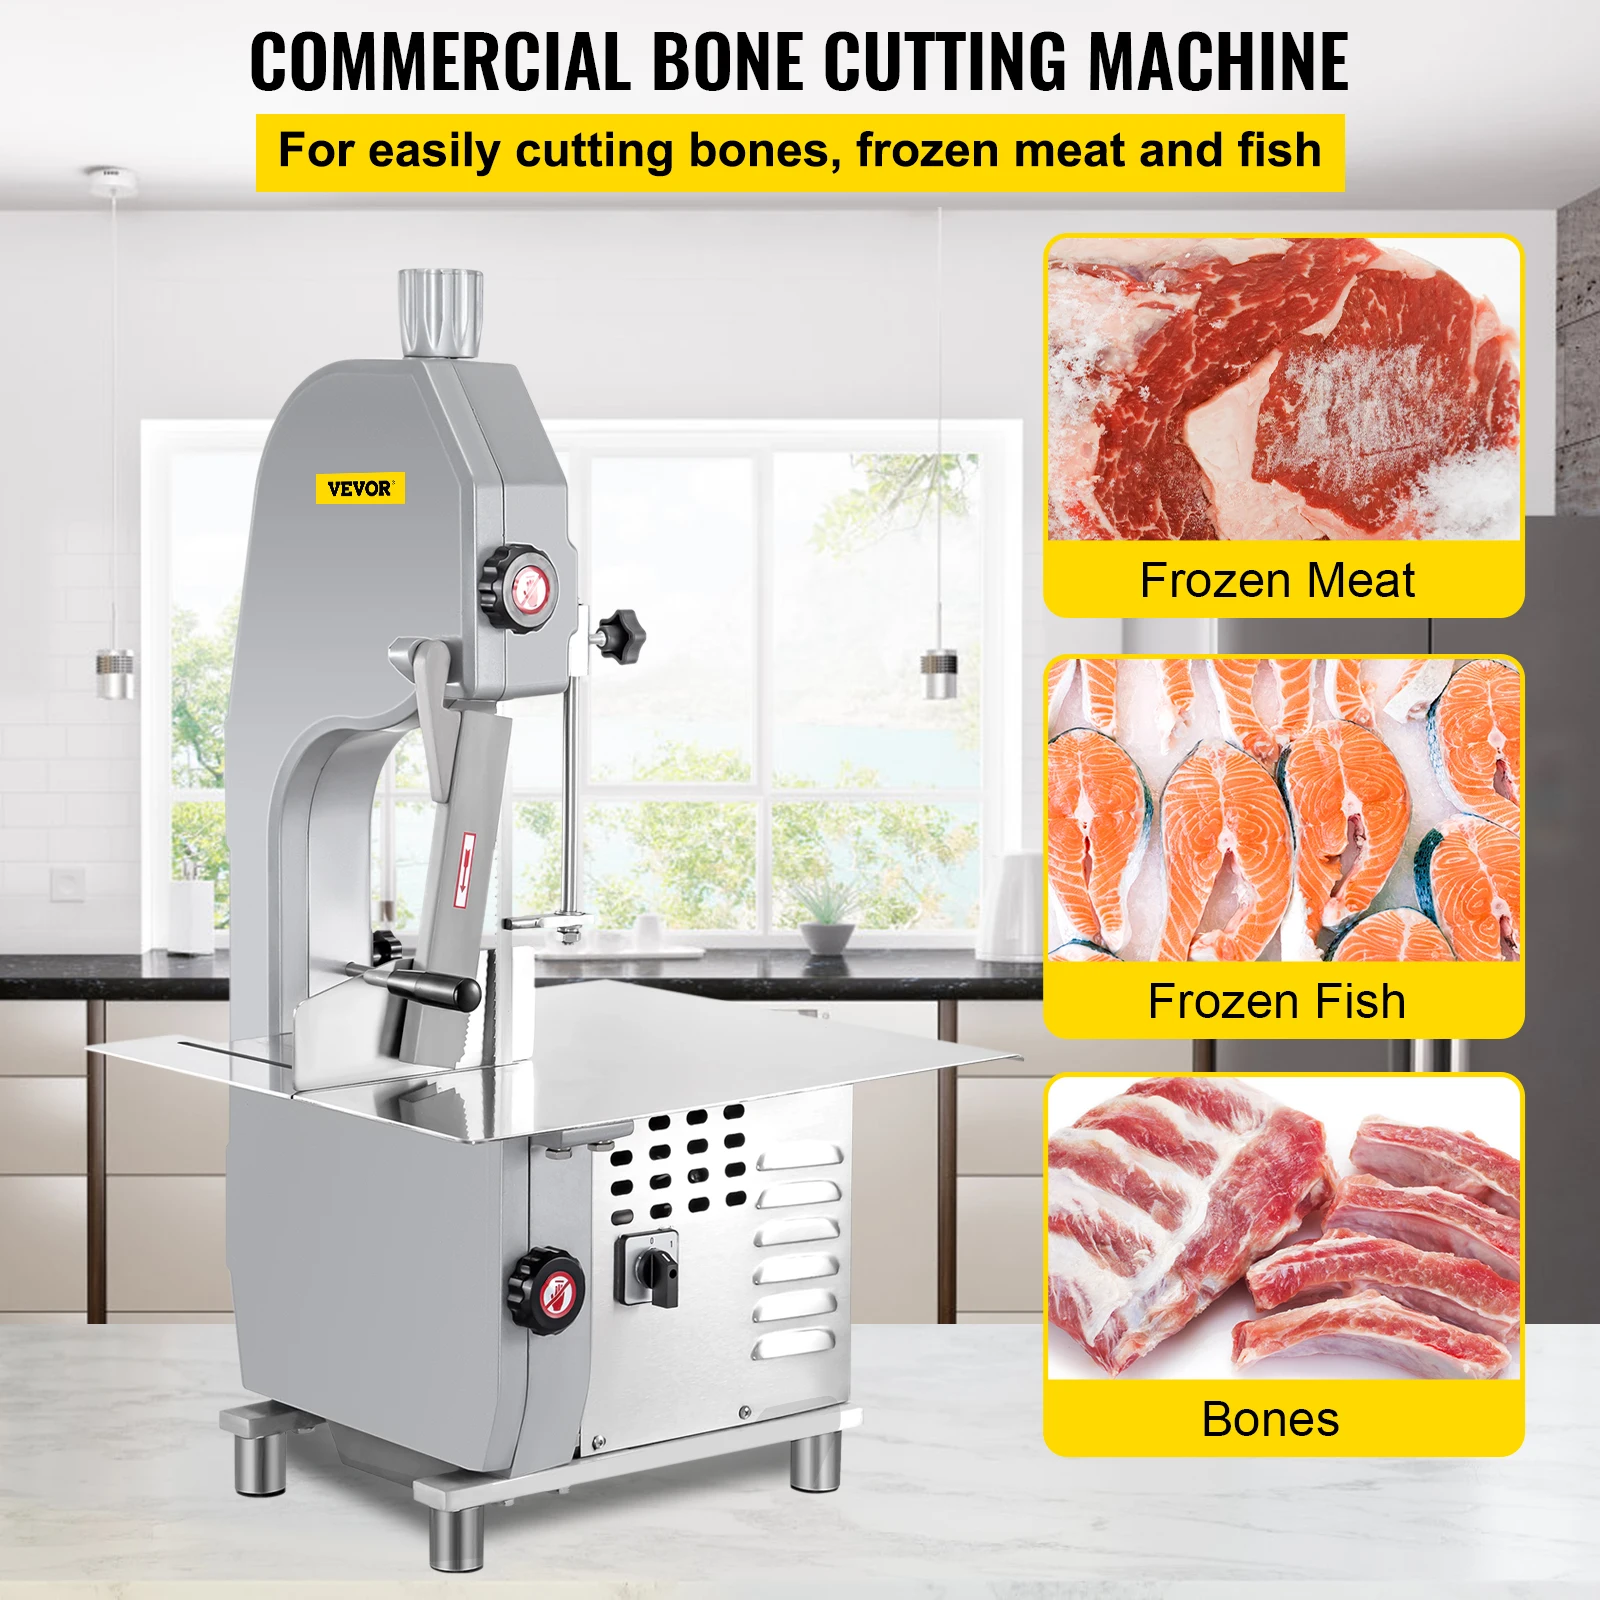 https://ae01.alicdn.com/kf/S618d9e75e55447ed97bd5806f31d9ae0S/VEVOR-Electric-Meat-Bone-Saw-Machine-Cutting-Maker-Kitchen-Chopper-Food-Grade-Stainless-Steel-Widely-Used.jpg